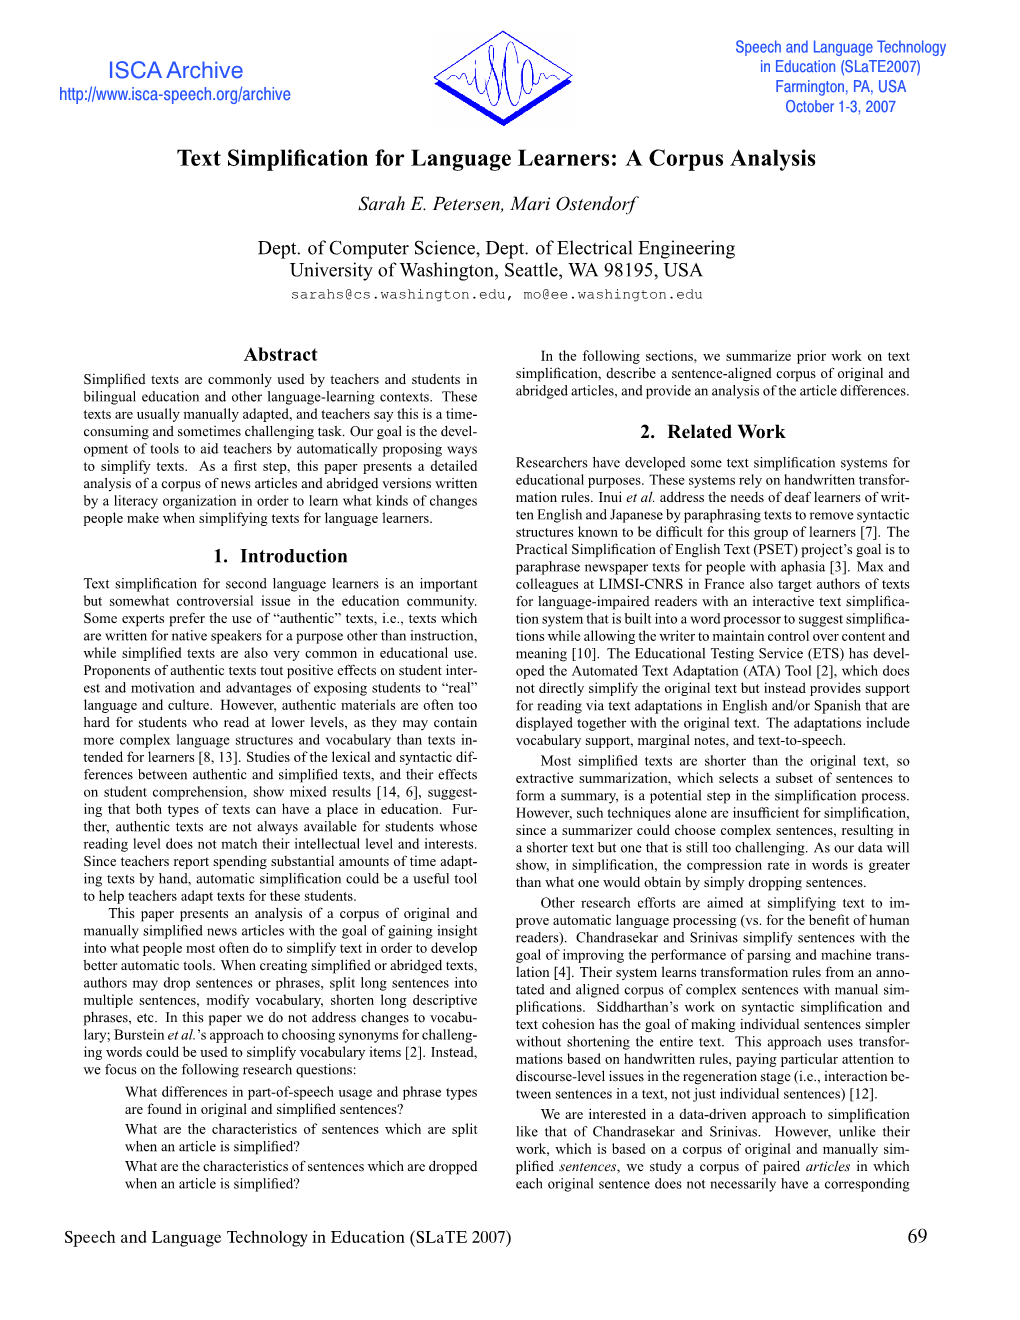 Text Simplification for Language Learners: a Corpus Analysis